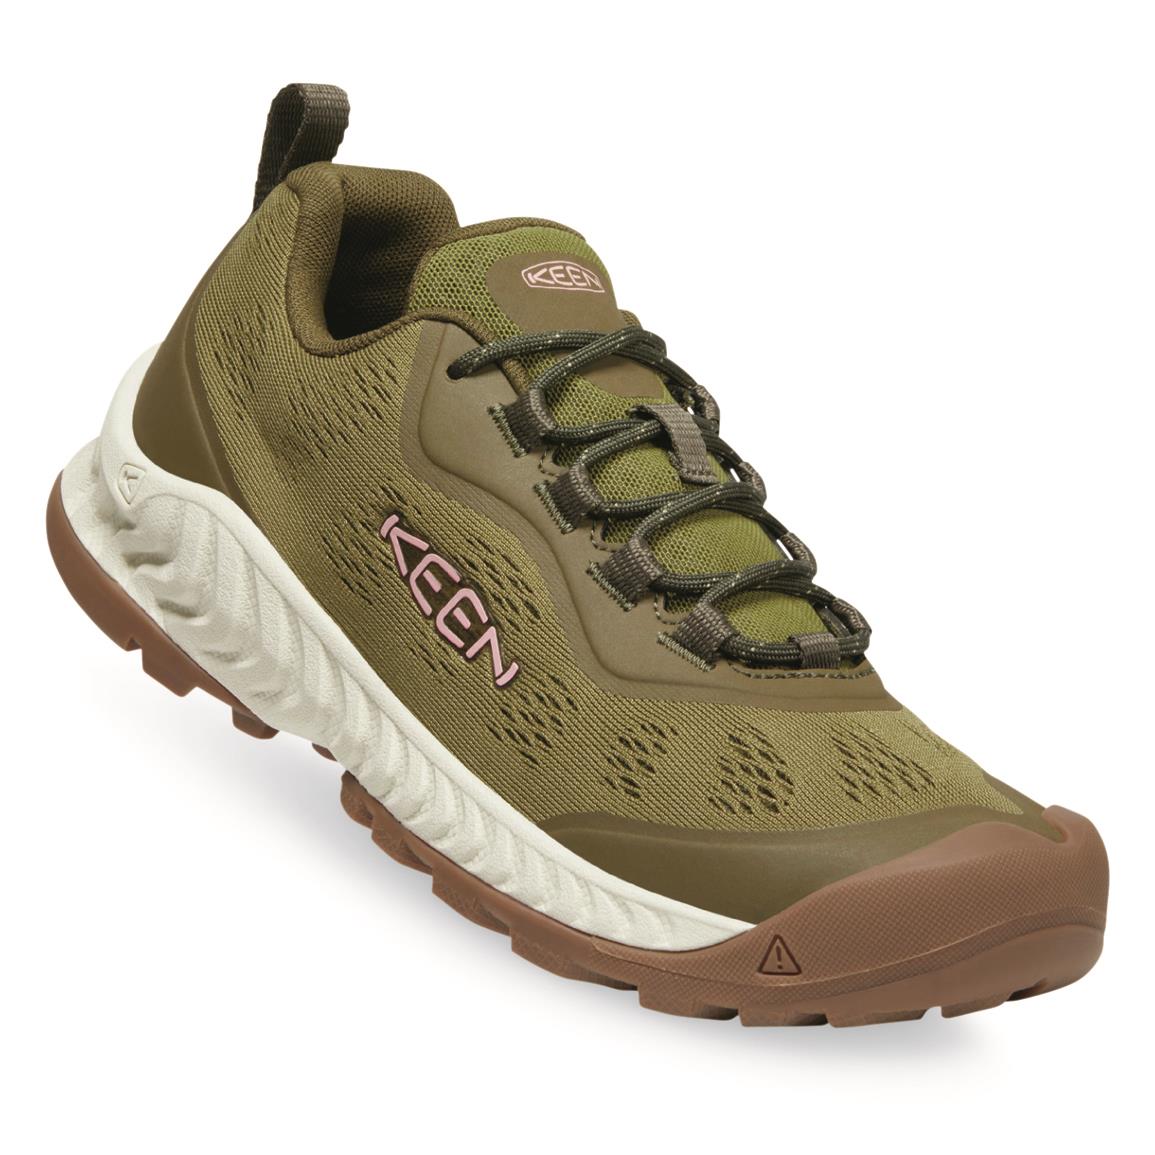 KEEN Women's NXIS Speed Hiking Shoes, Olive Drab/pink Icing